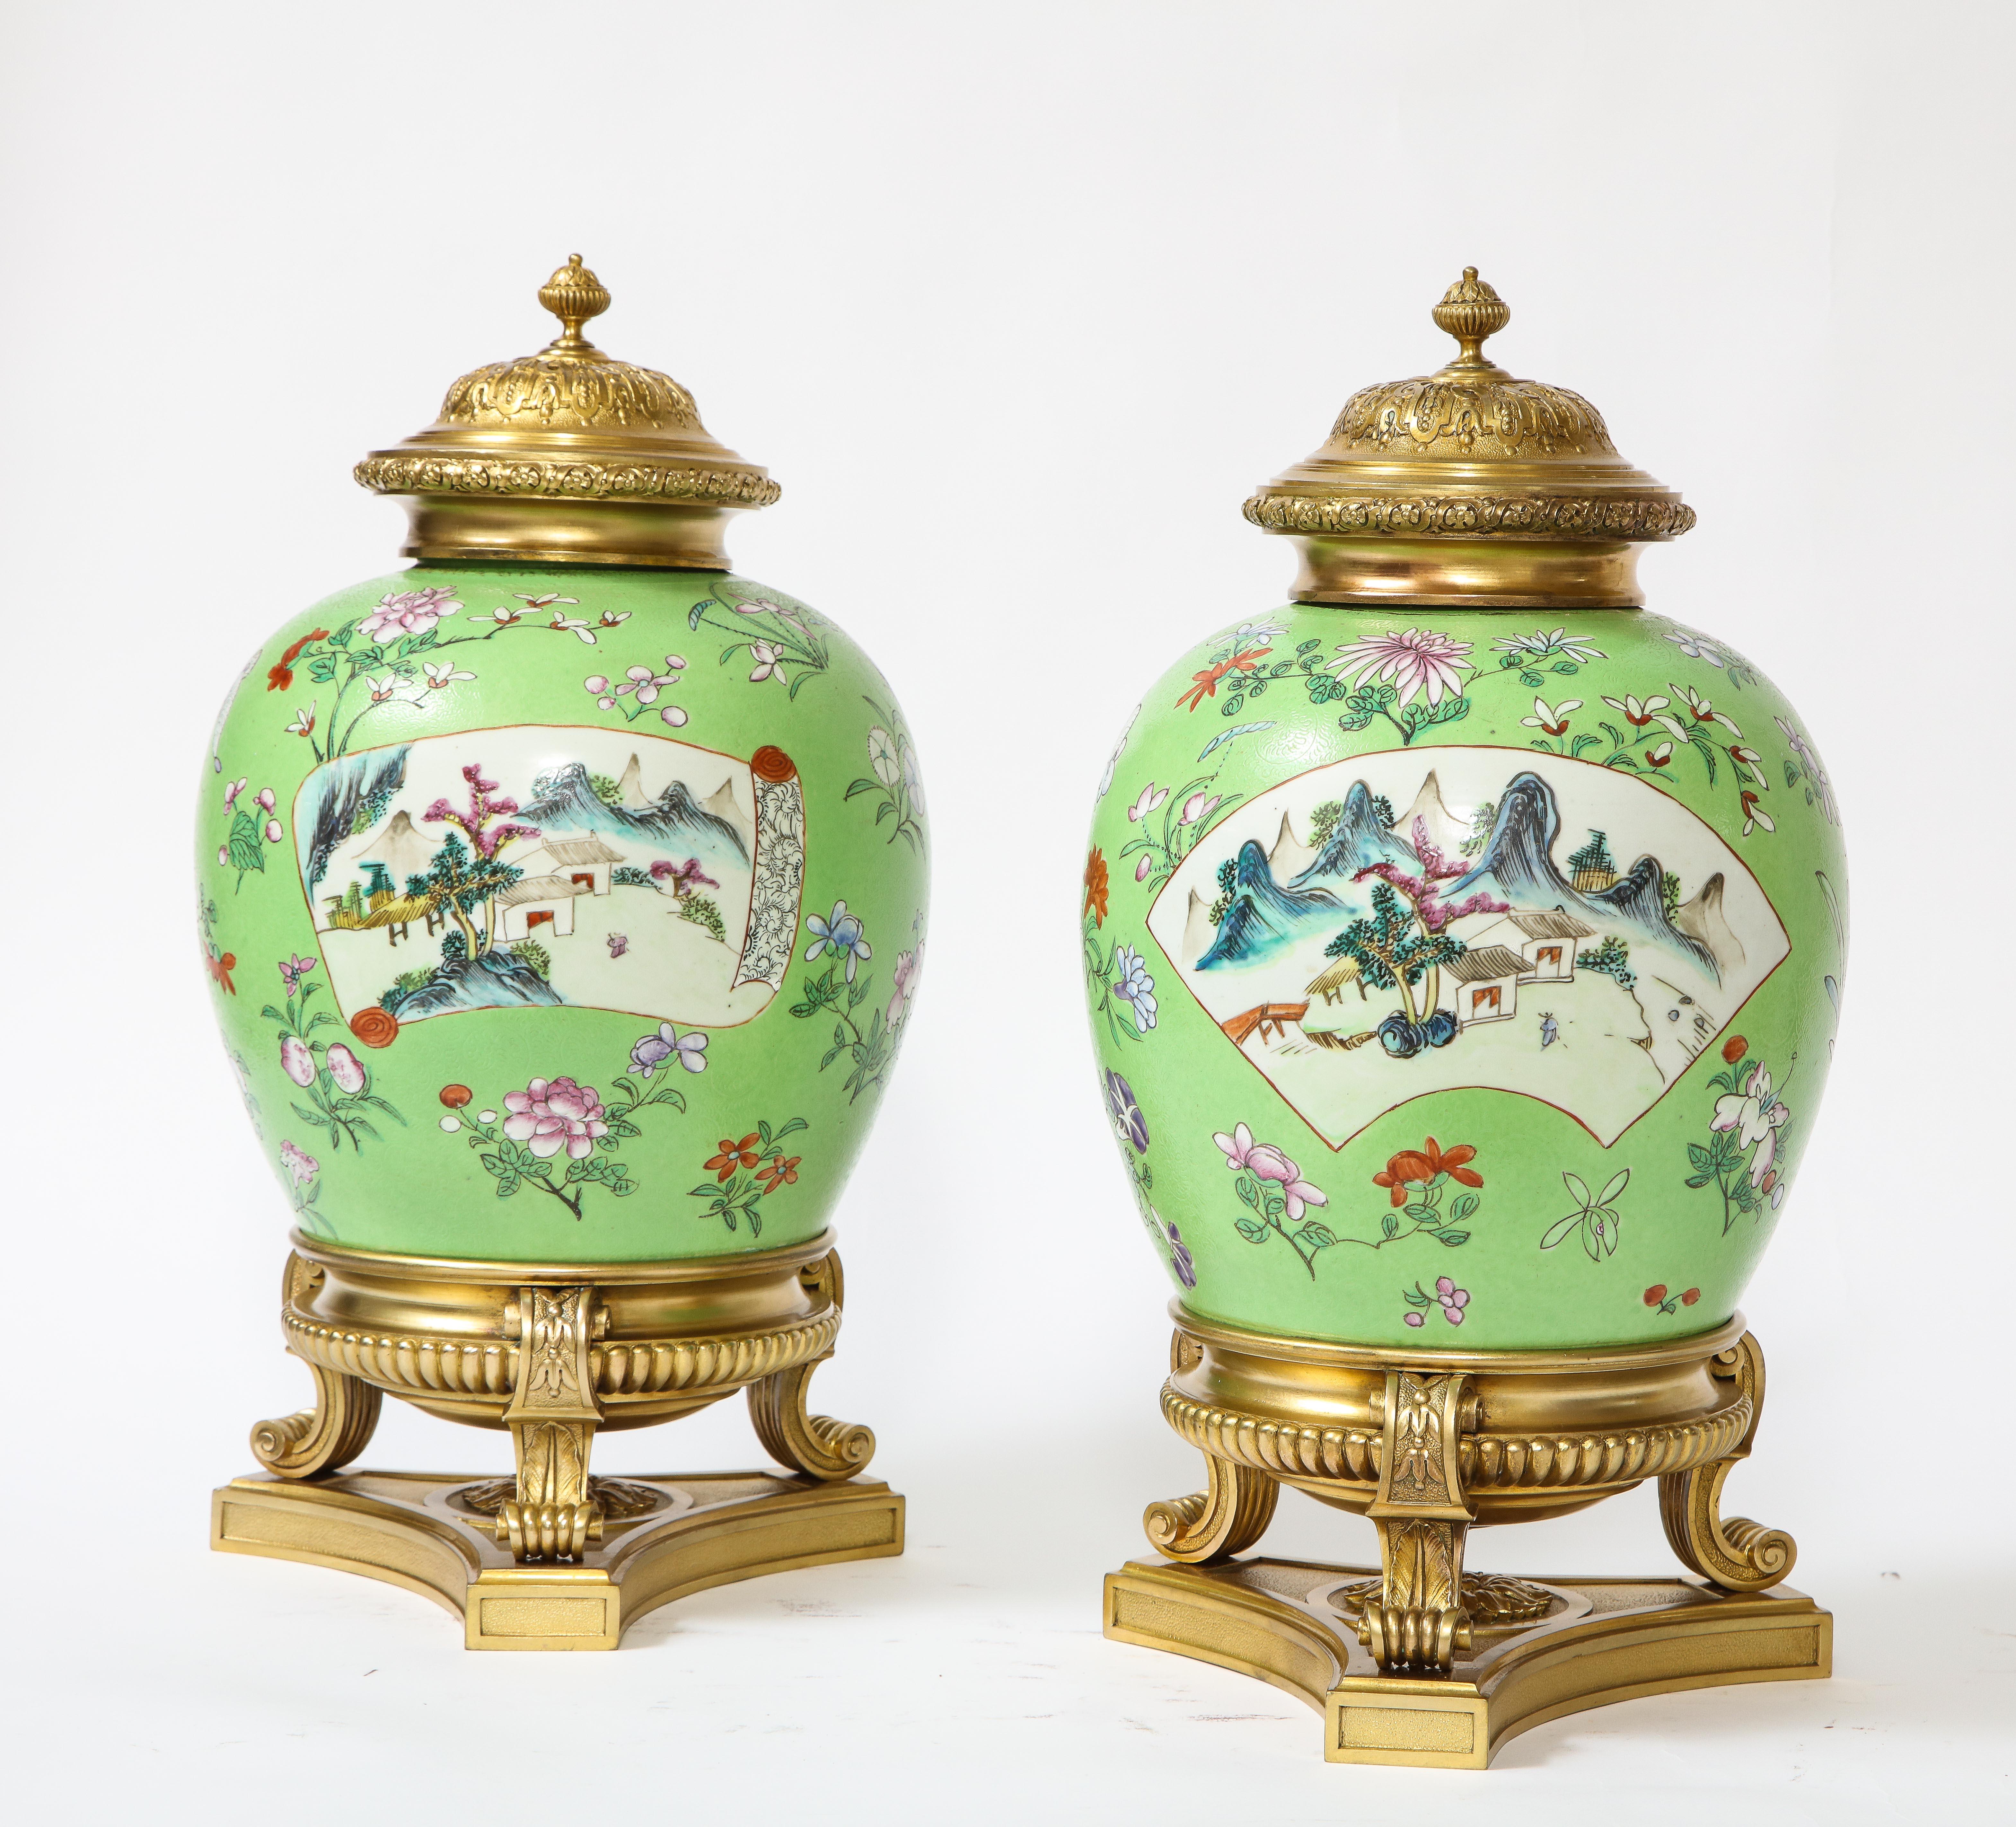 A fabulous and quite beautiful pair of Louis XVI style dore bronze mounted Chinese Famille Rose porcelain, sgraffito ground covered vases or por pourries. Each is exceptionally hand painted with an array of beautiful enamels on a vert sgraffito